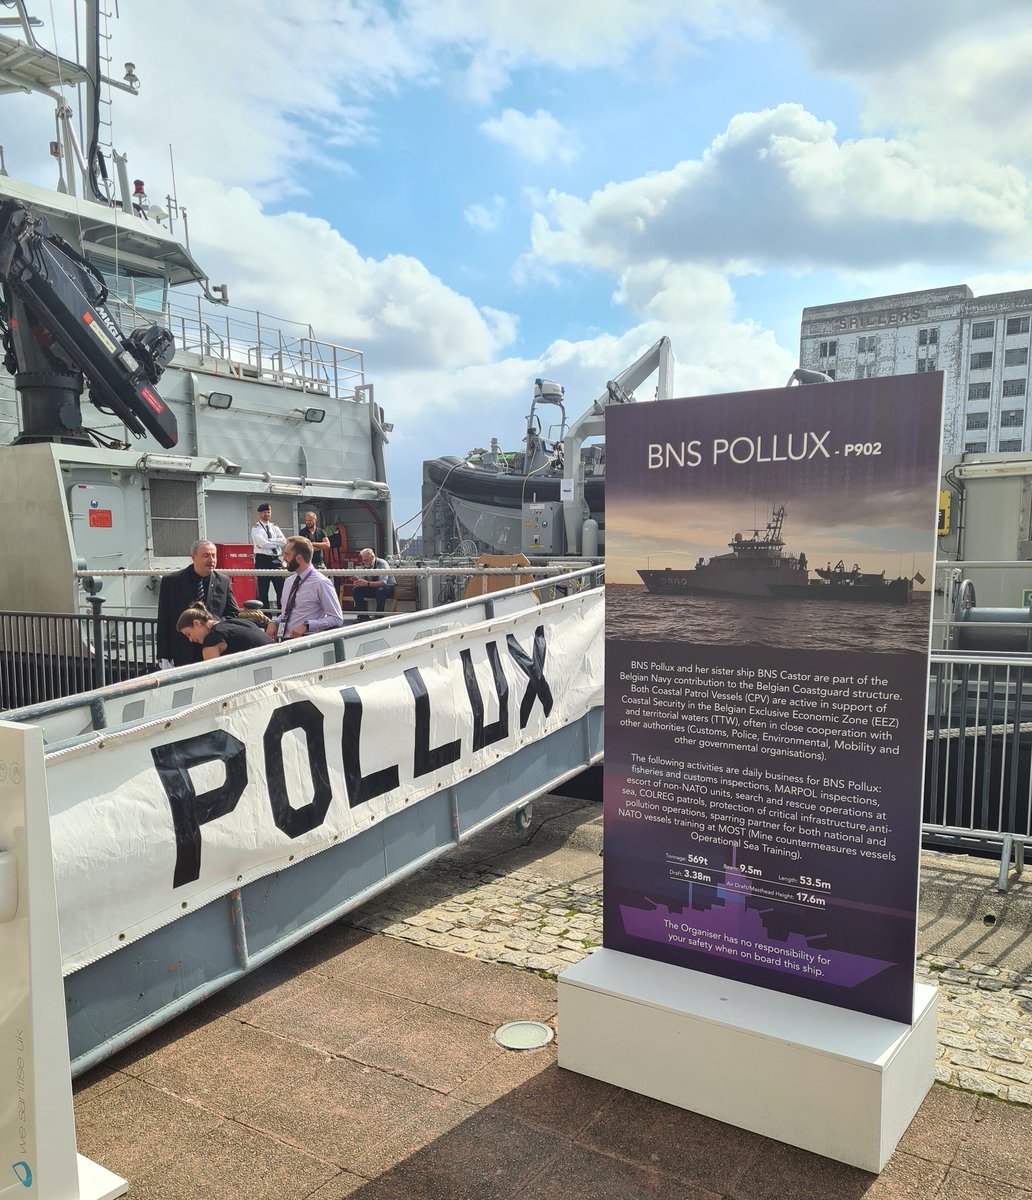 Join us for a visit on board coastal patrol vessel BNS Pollux. 

Order your tour at the @DSEI_event ship visiting desk in the central hall of @ExCeLLondon. 

@TheBelgianNavy 
@BSDI_Agoria 
#DSEI2021